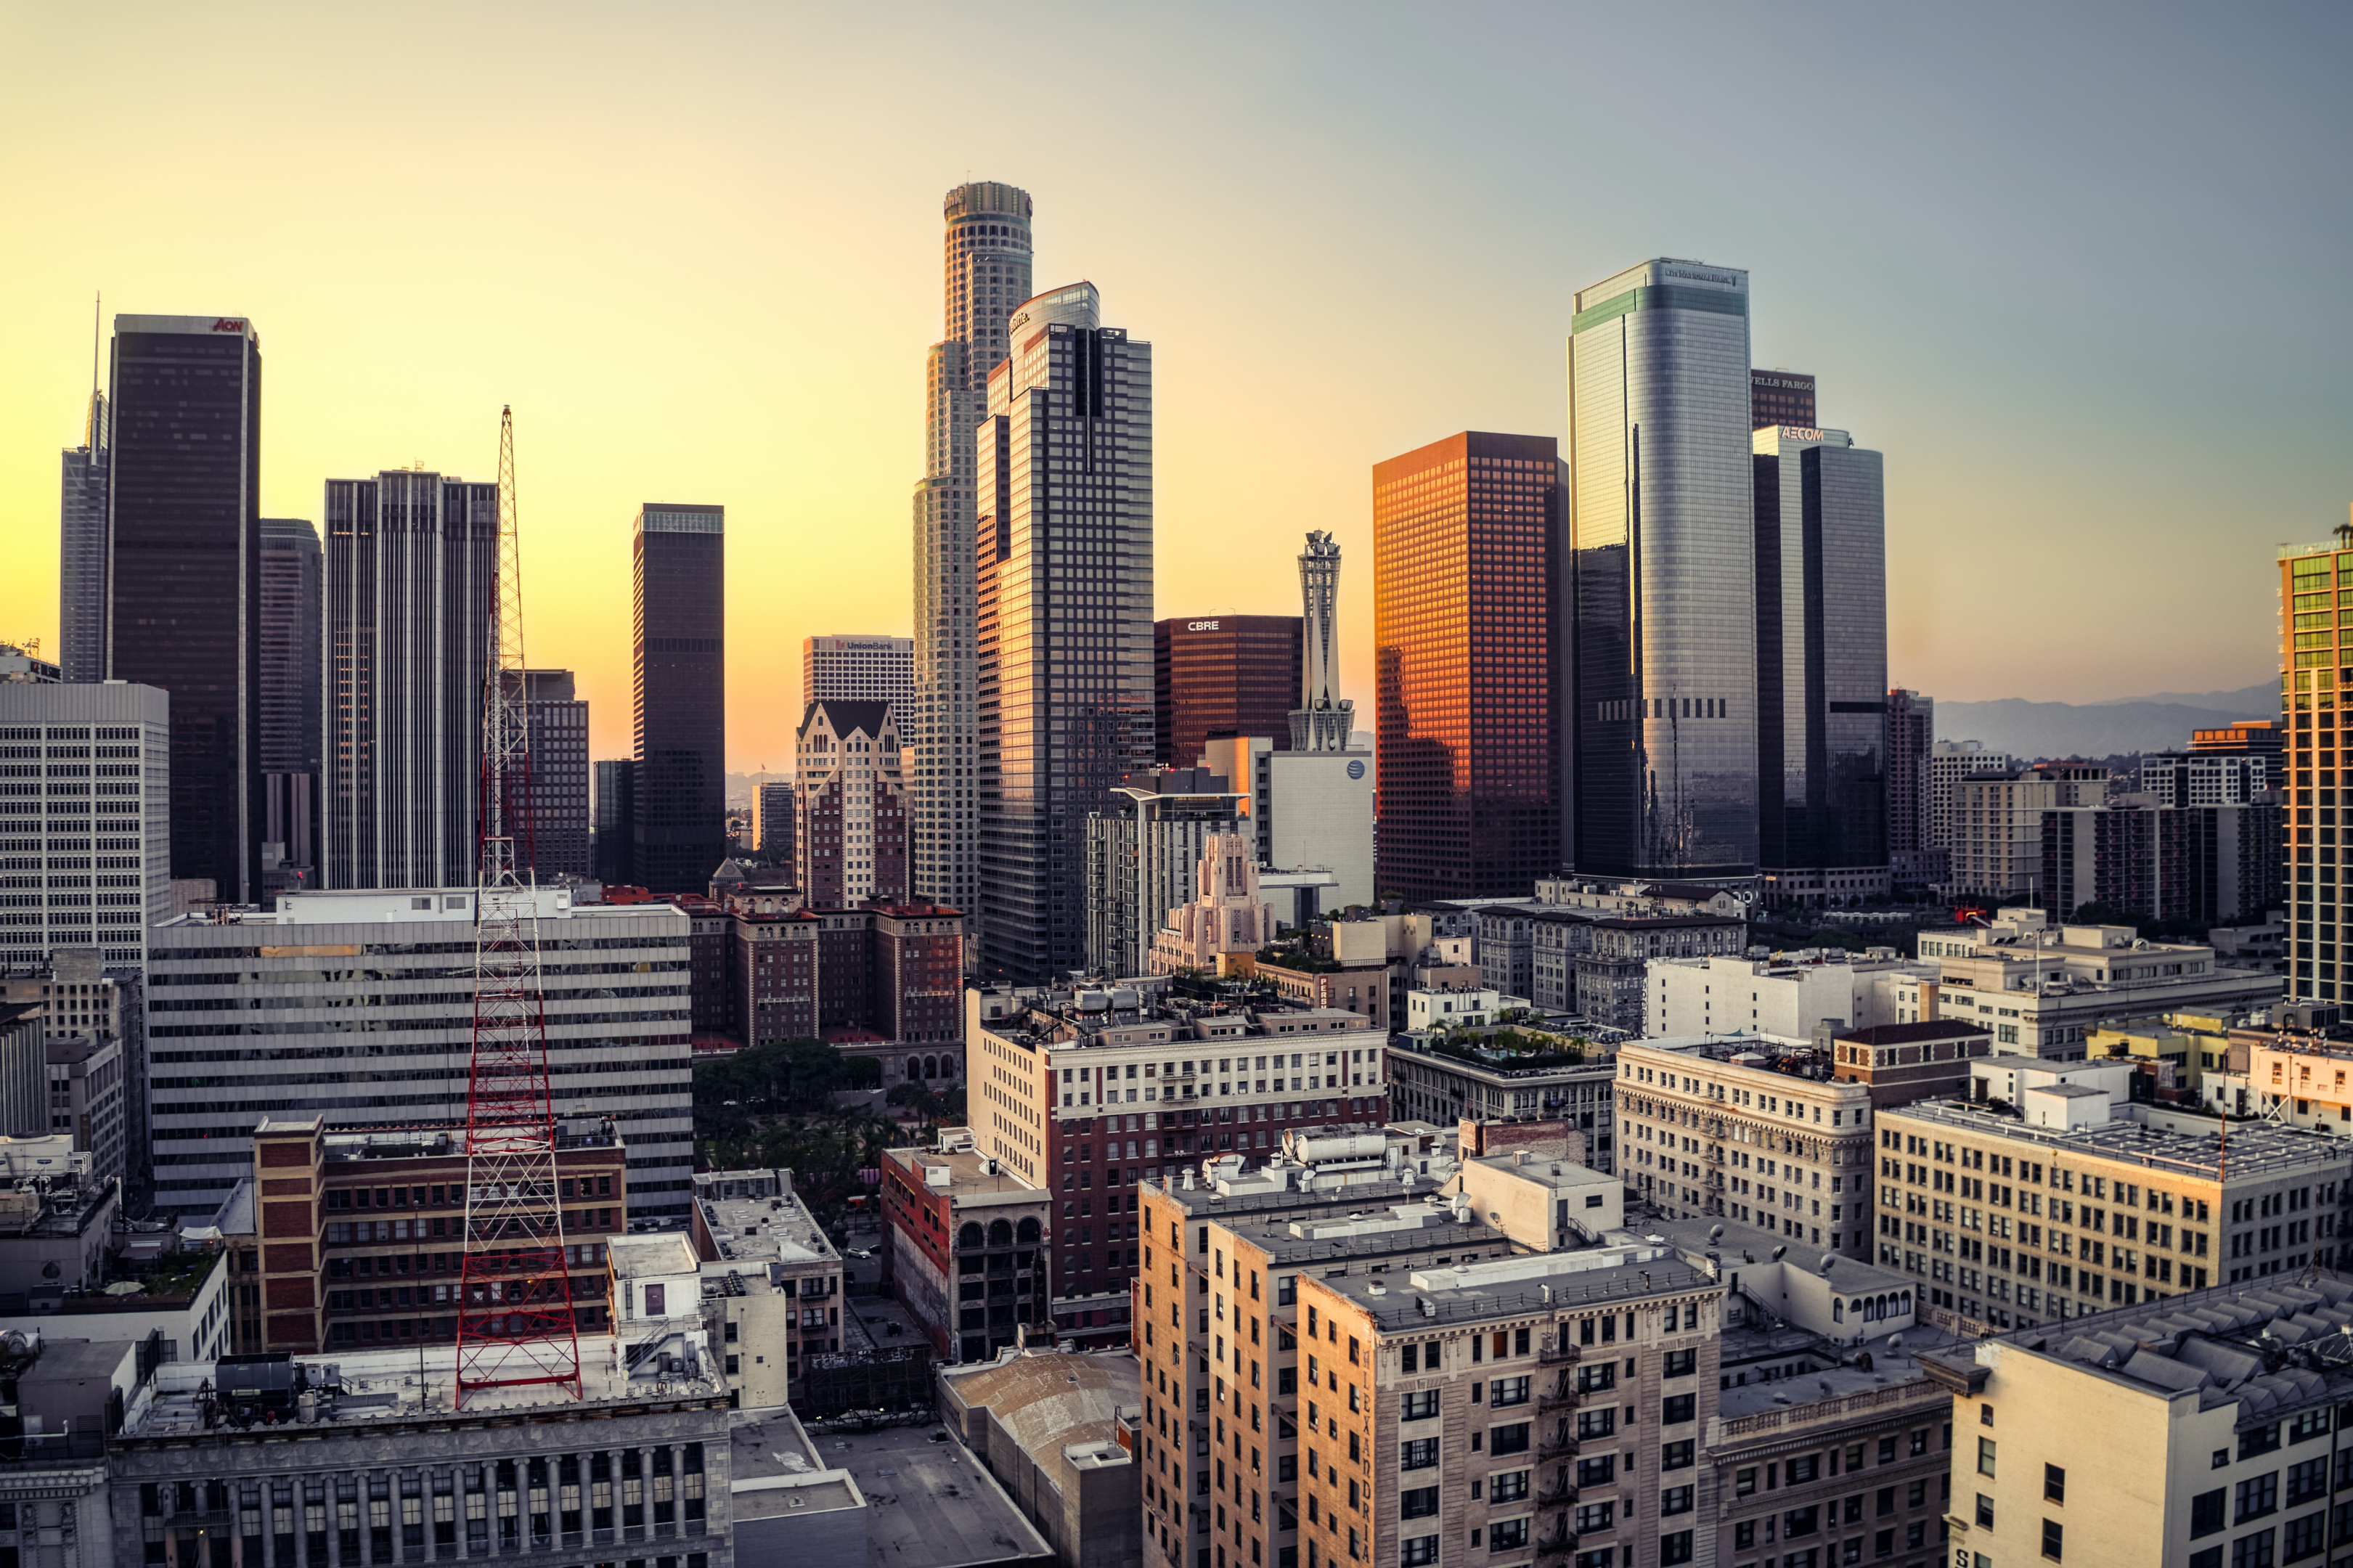 View of DTLA at sunset in Los Angeles, CA. Photo by Venti Views